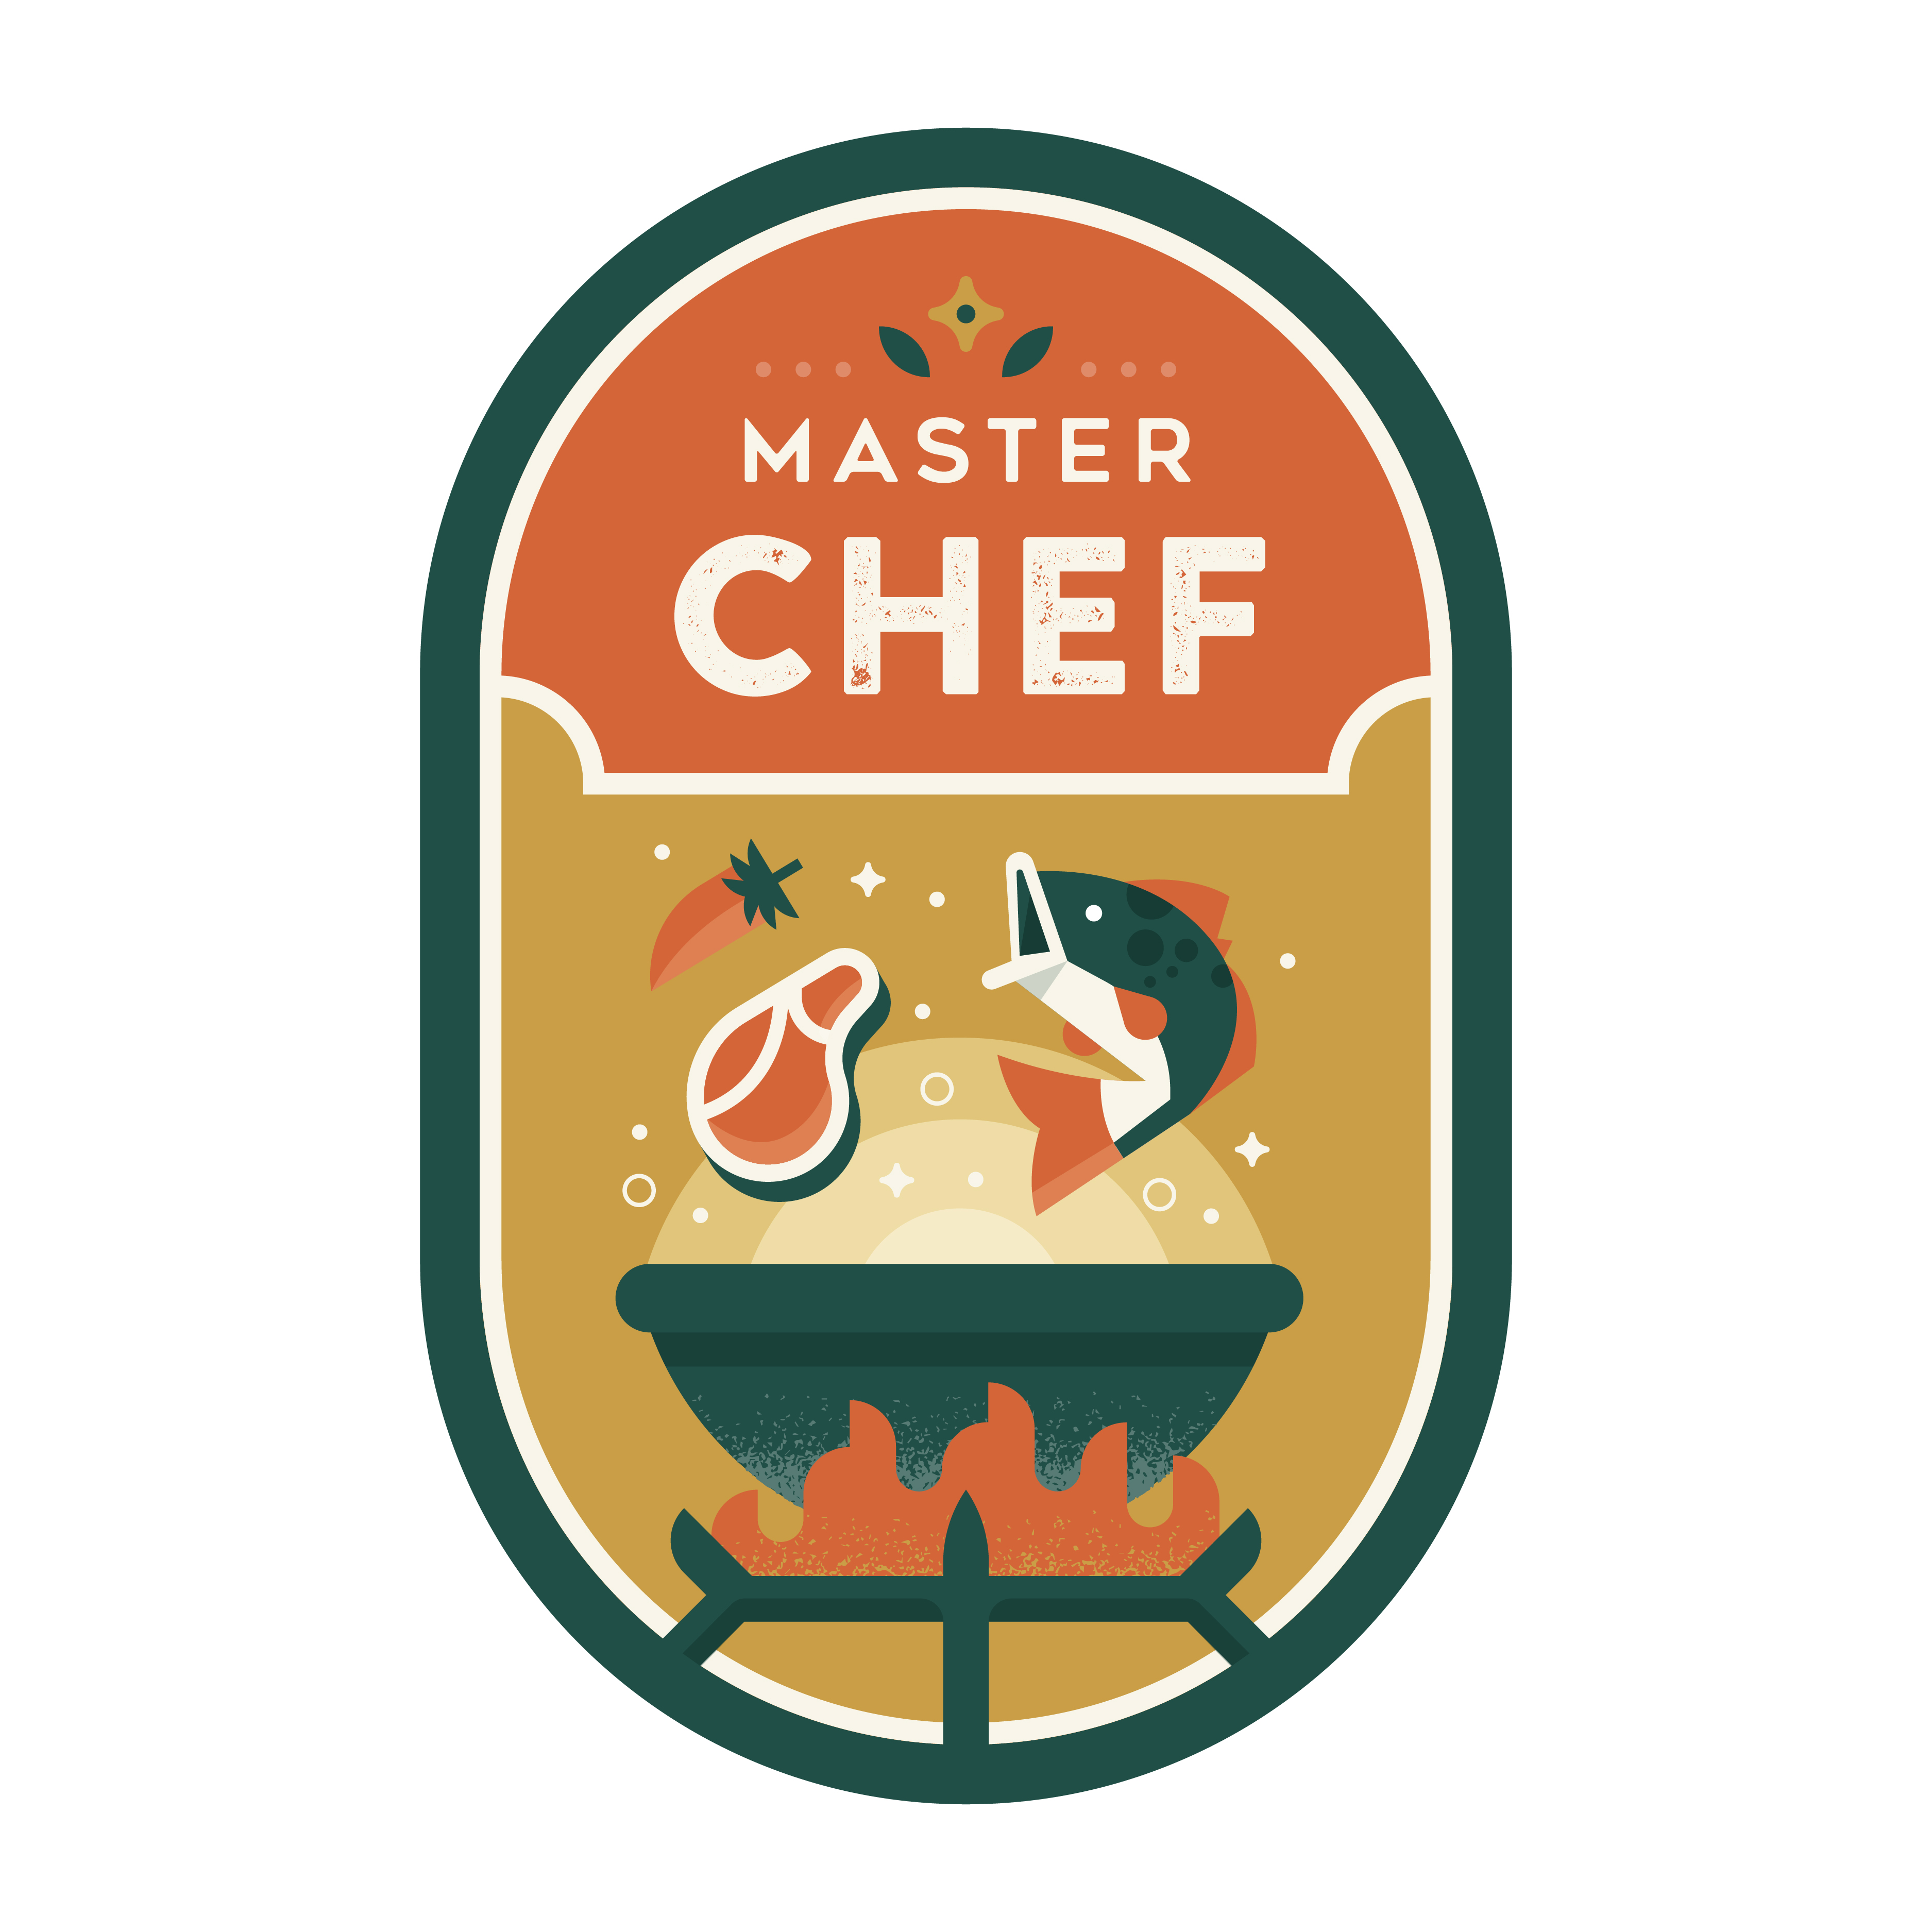 Master Chef logo design by logo designer Trey Ingram for your inspiration and for the worlds largest logo competition